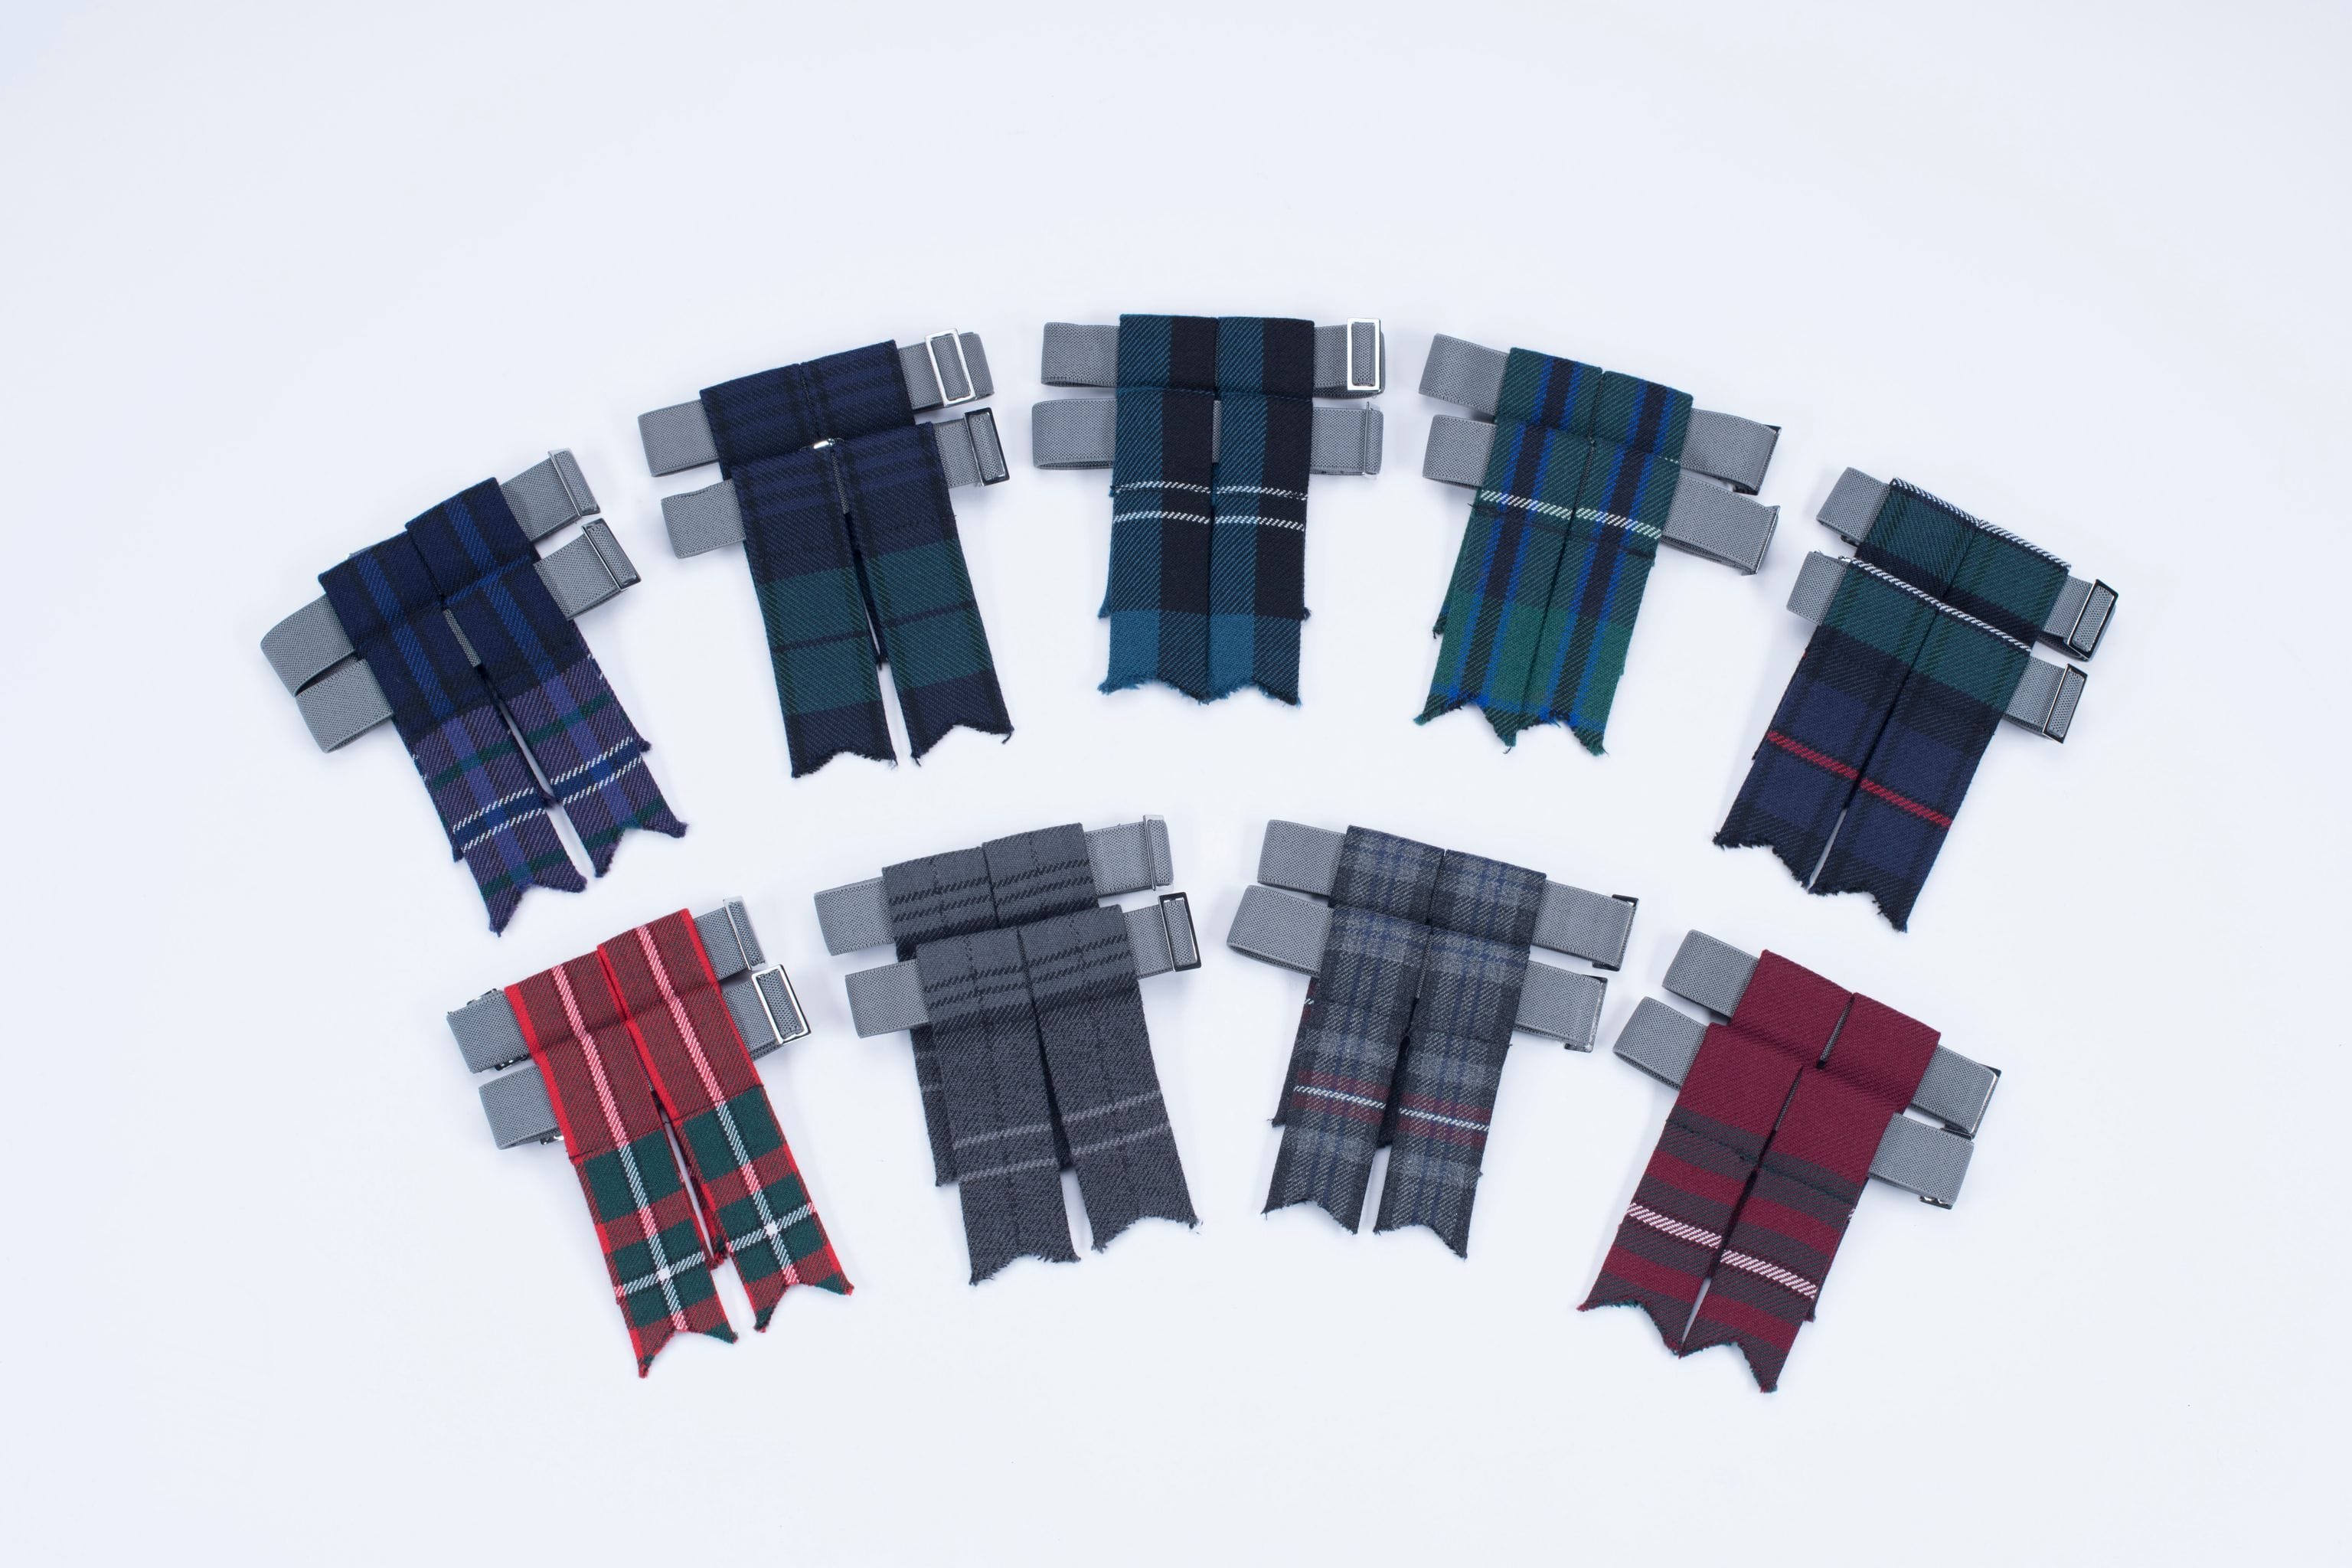 Signature Collection Kilt Outfit - MacGregor and MacDuff